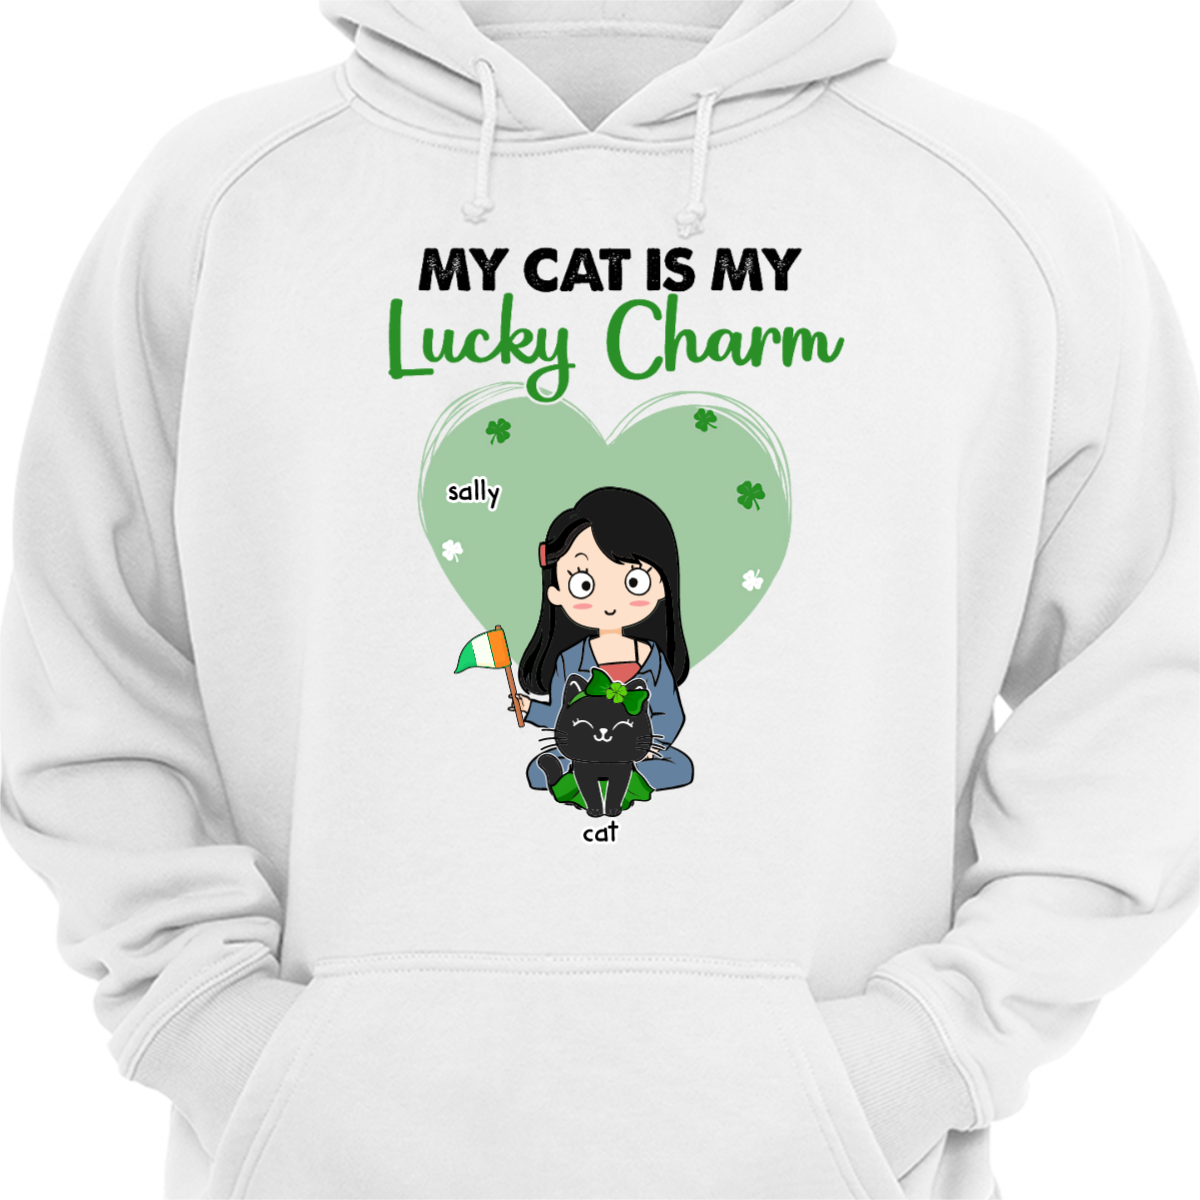 My Cats My Lucky Charms Chibi St Patrick's Day パーカー スウェットシャツ